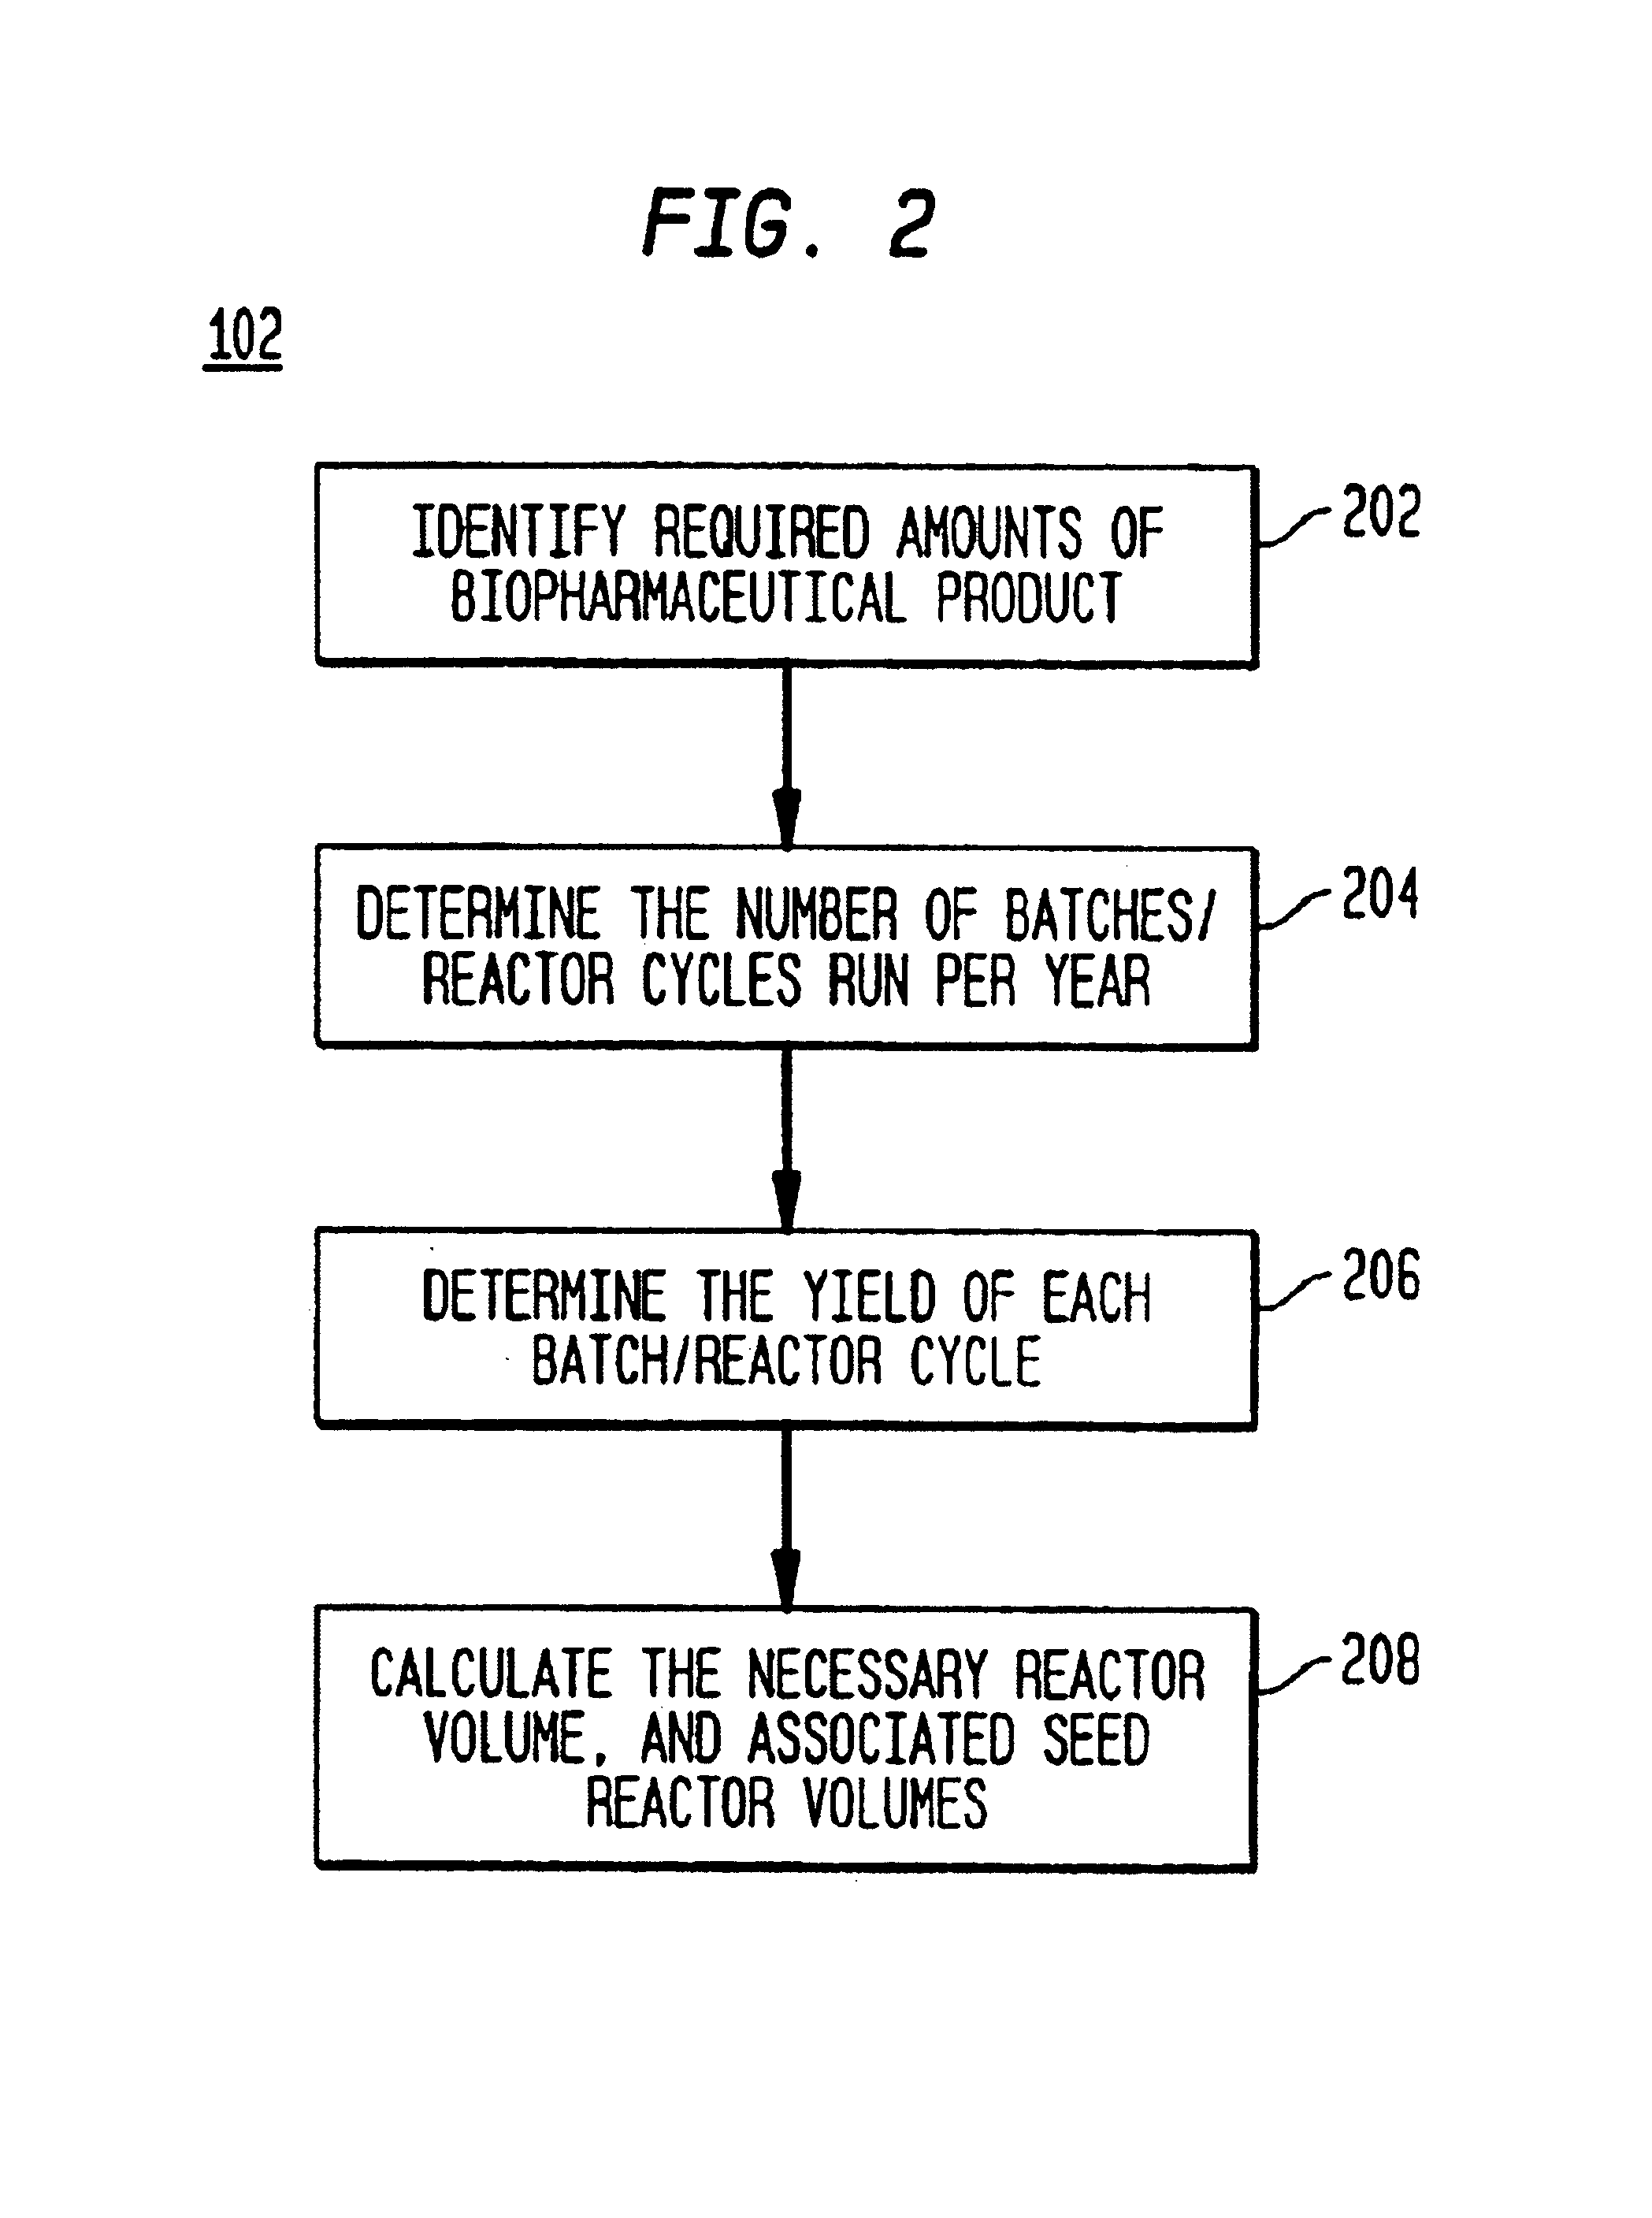 System and method for simulating, modeling and scheduling of solution preparation in batch process manufacturing facilities